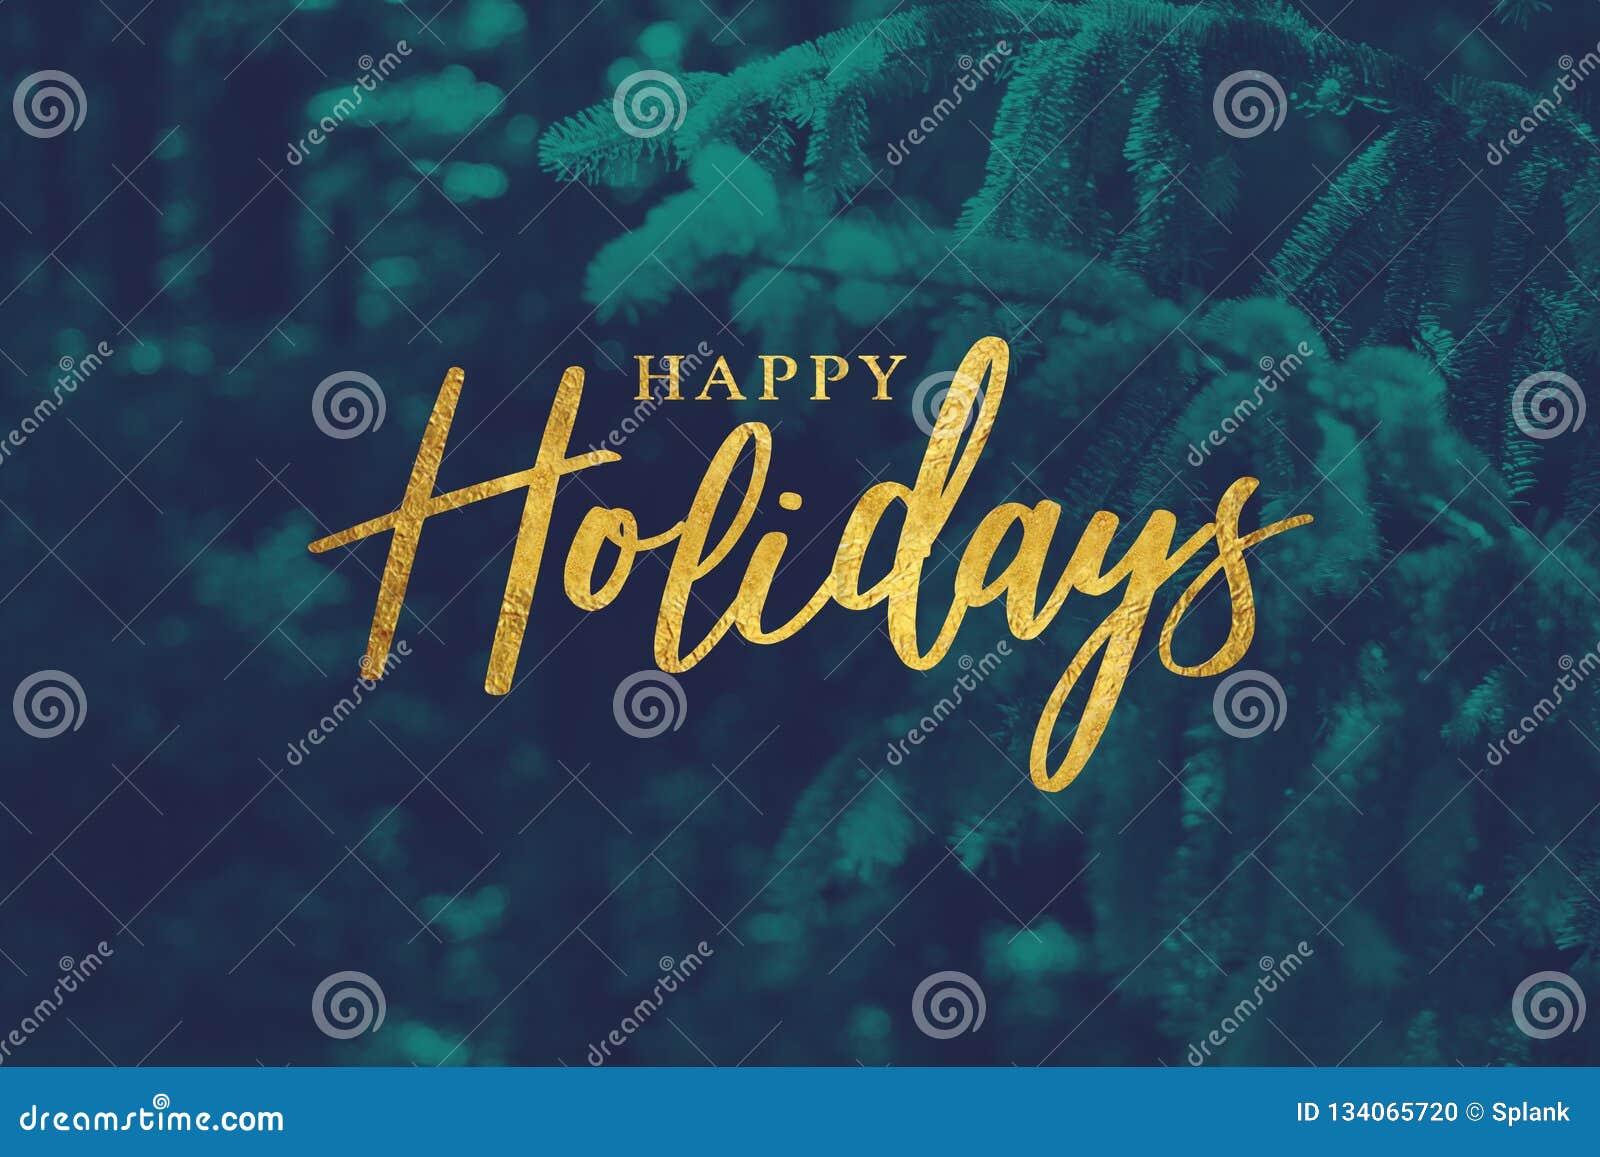 gold happy holidays script with duotone evergreen branches background